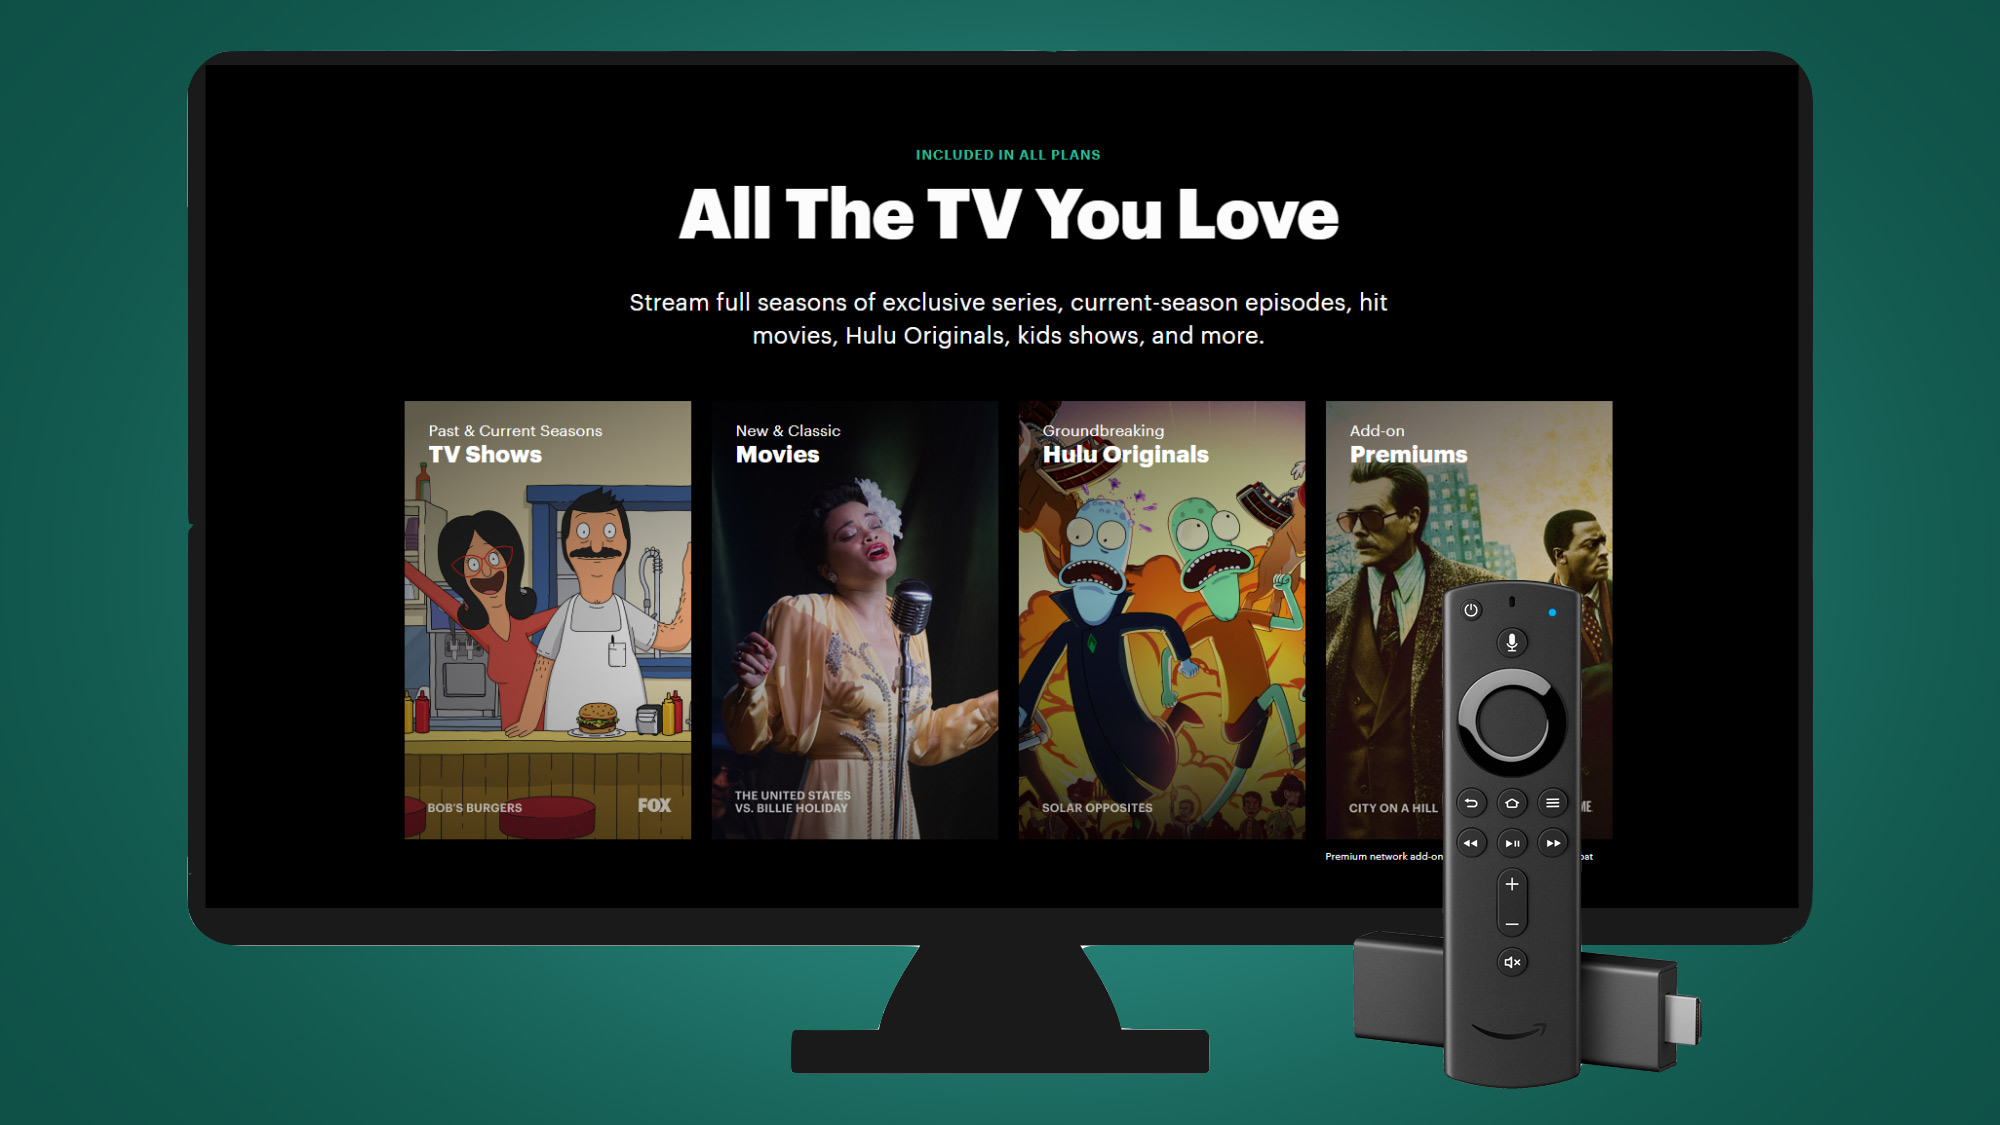 How can you Improve your Membership on the Hulu